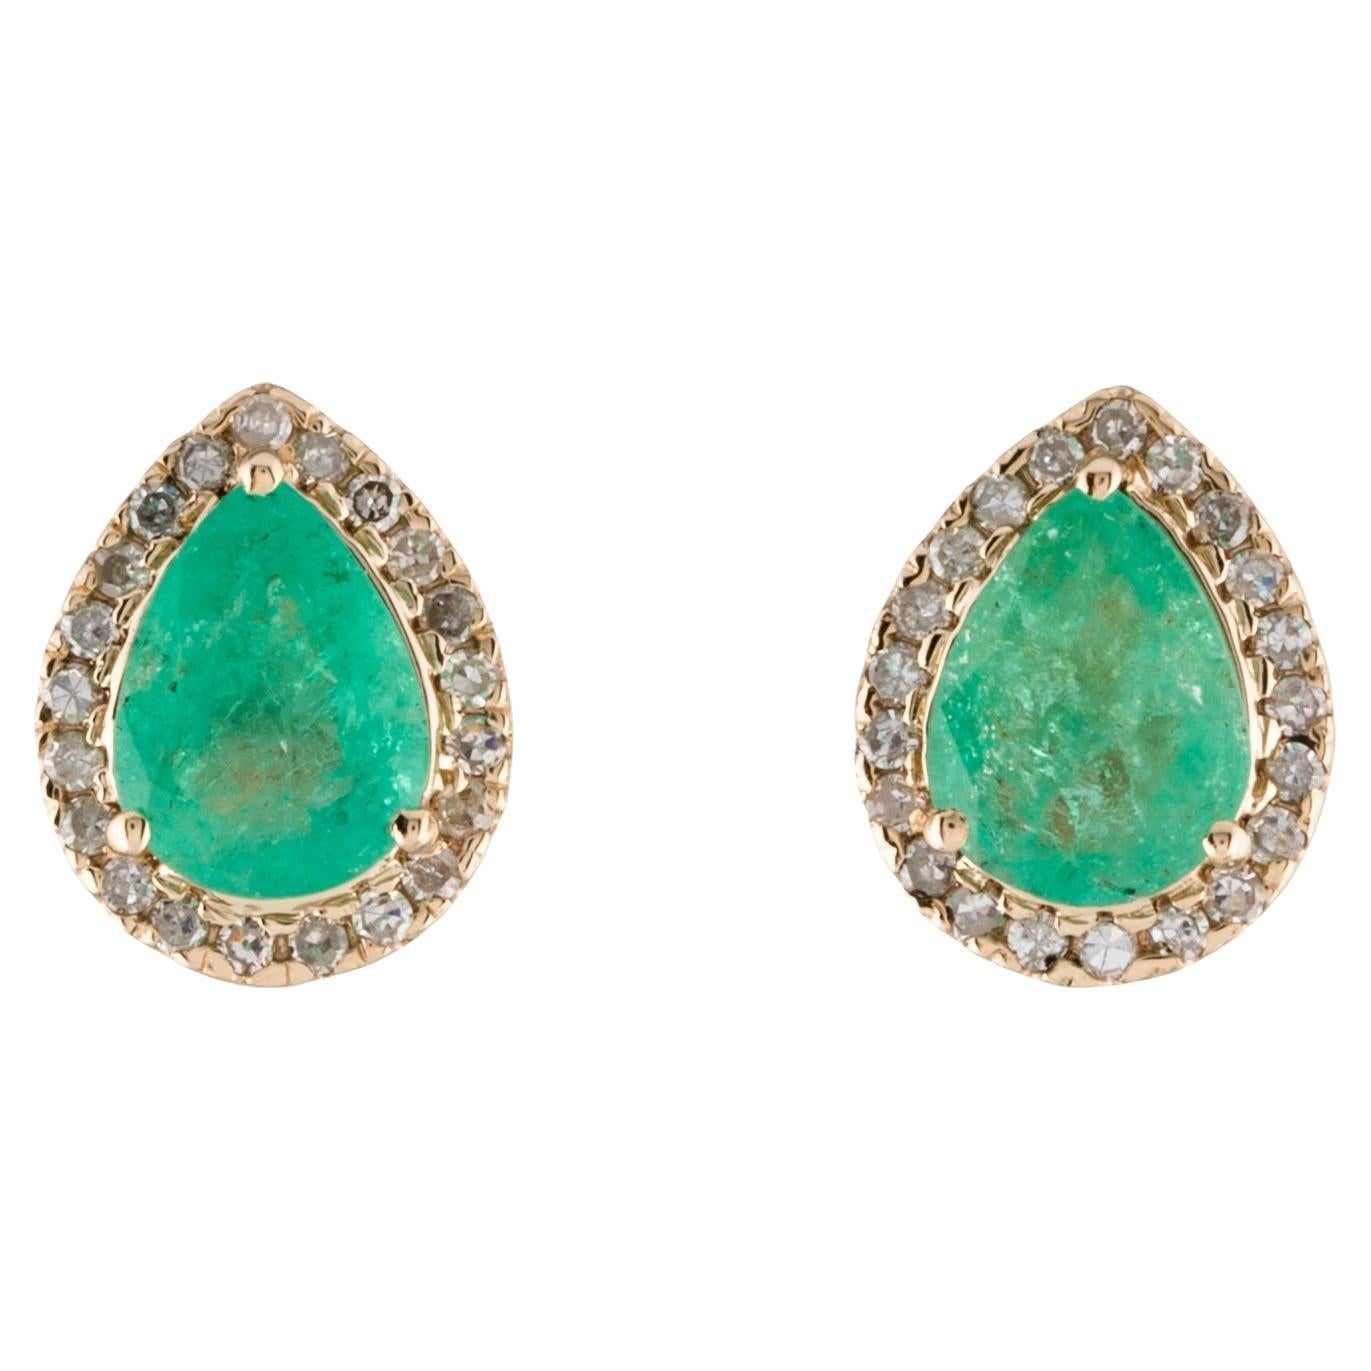 14K Yellow Gold Stud Earrings with 2.06ct Pear-Shaped Emeralds and Diamond